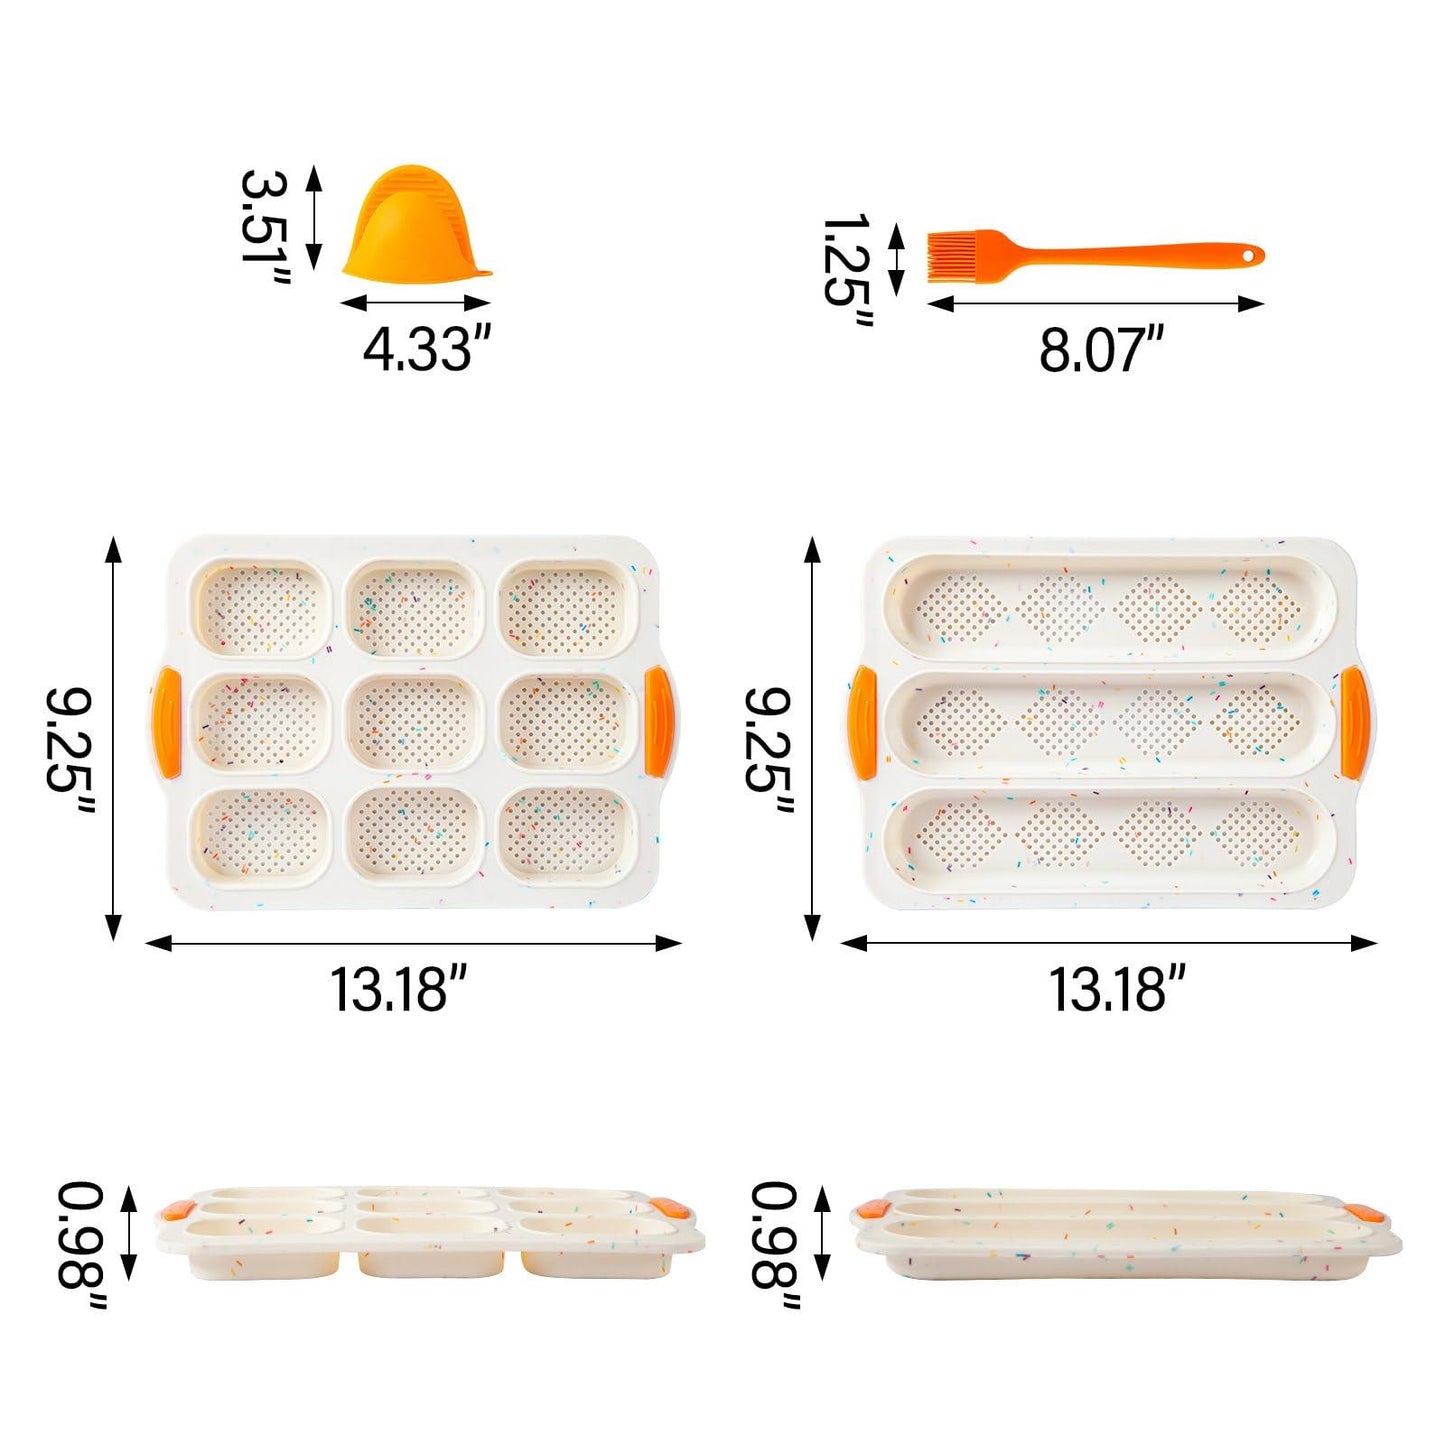 Codcaw Set of 4 Silicone Baguette Pan with Gloves Brush, Bread Mold for Baking, Non-Stick Perforated French Bread Forms Tray, Hot Dog Bun Mold, Hamburgers Bun Pan, Bread Rolls Pans for DIY Cooking - CookCave